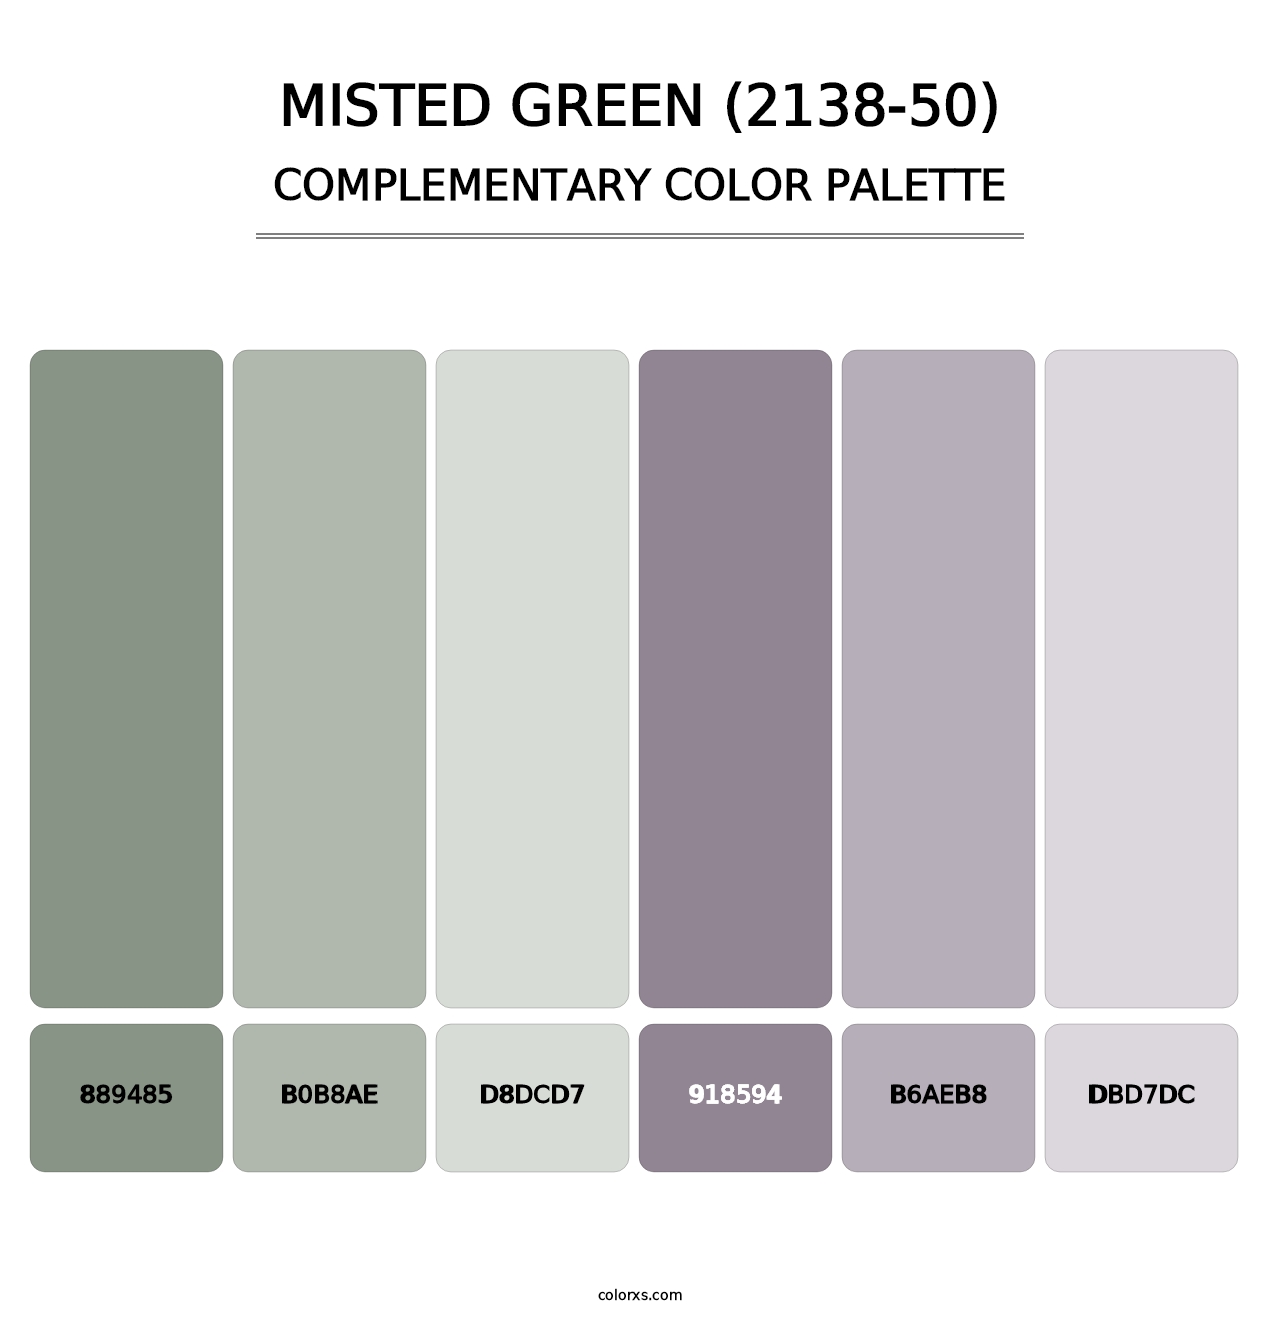 Misted Green (2138-50) - Complementary Color Palette